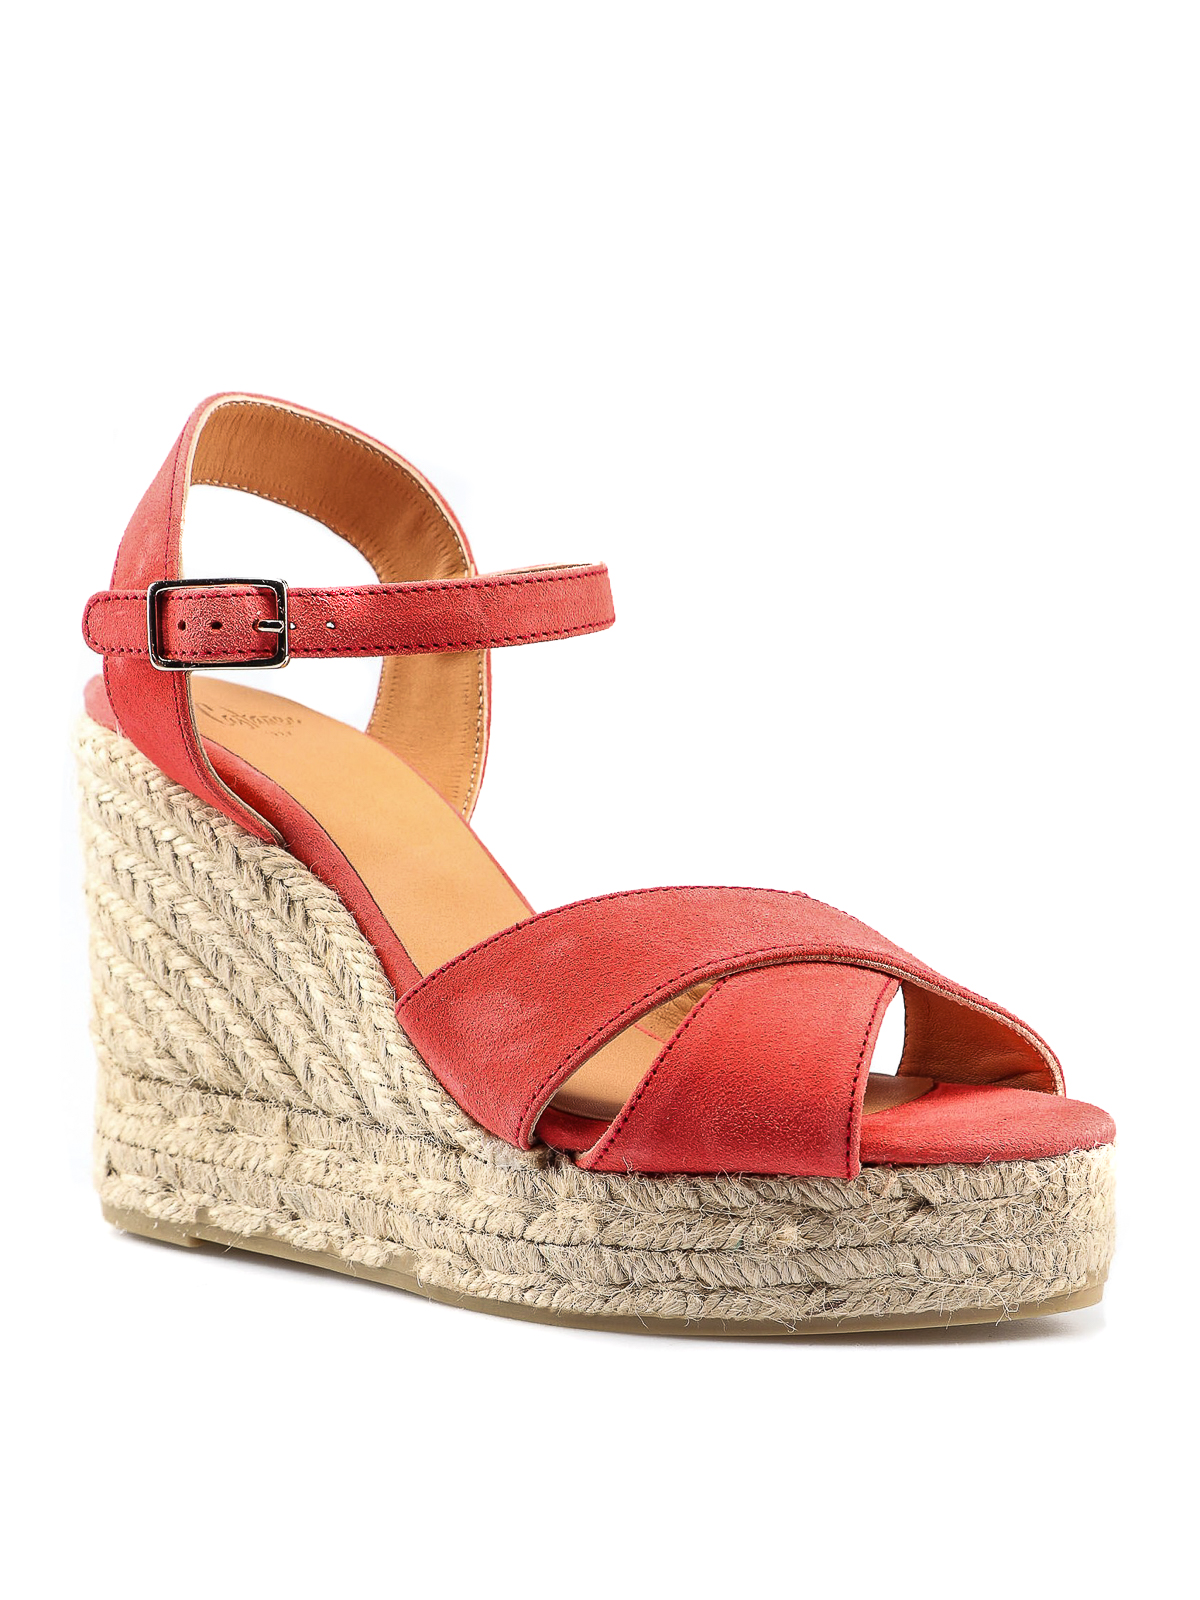 red suede wedges